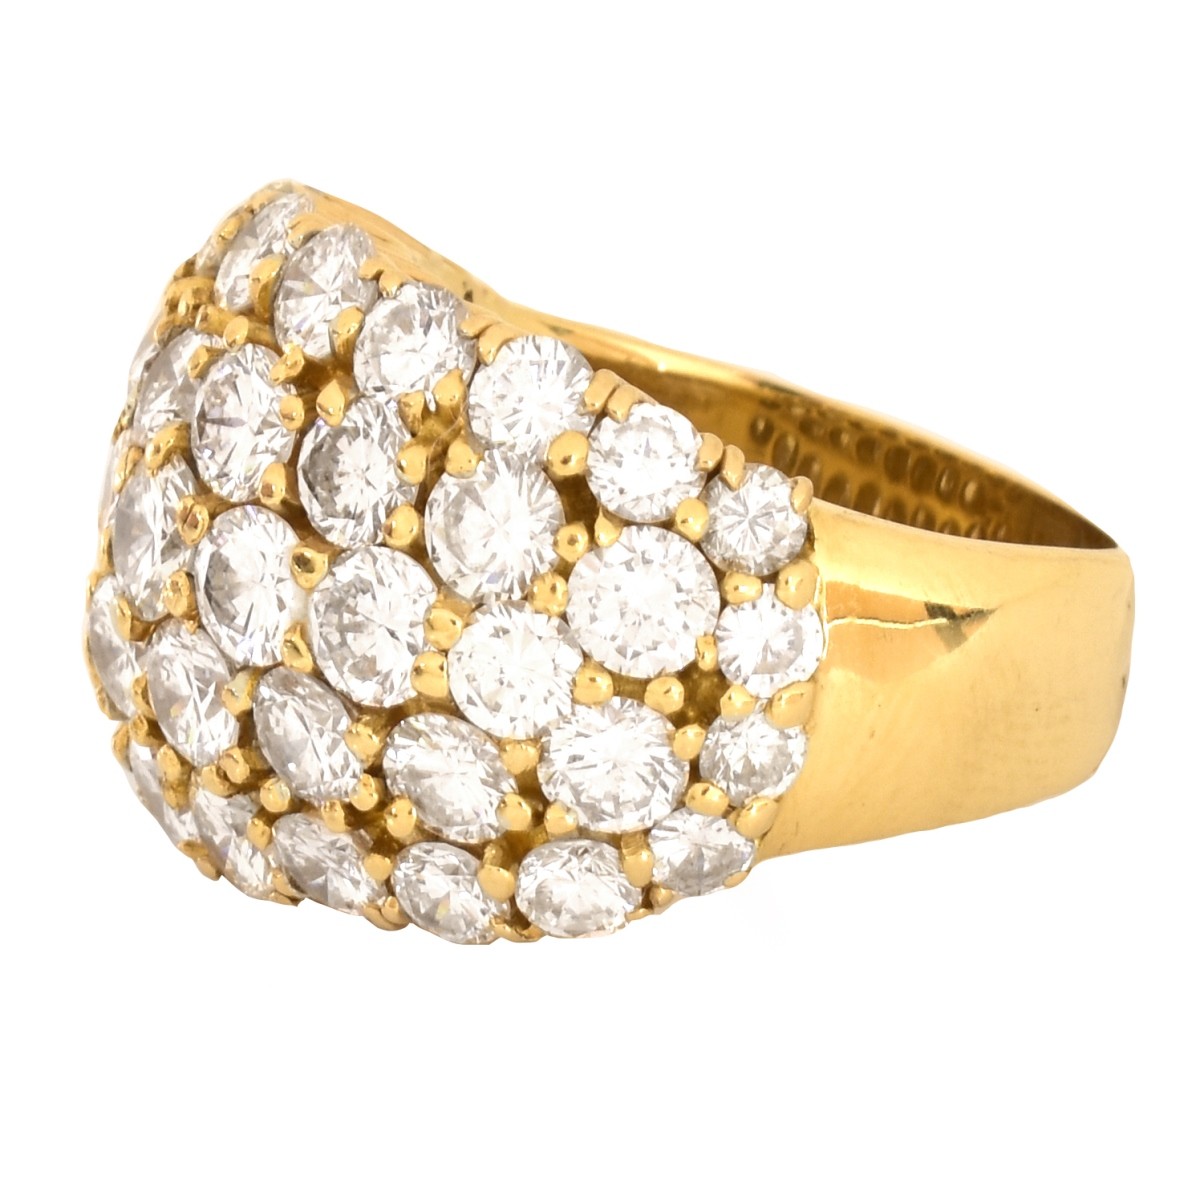 6.0ct TW Diamond and 18K Gold Ring